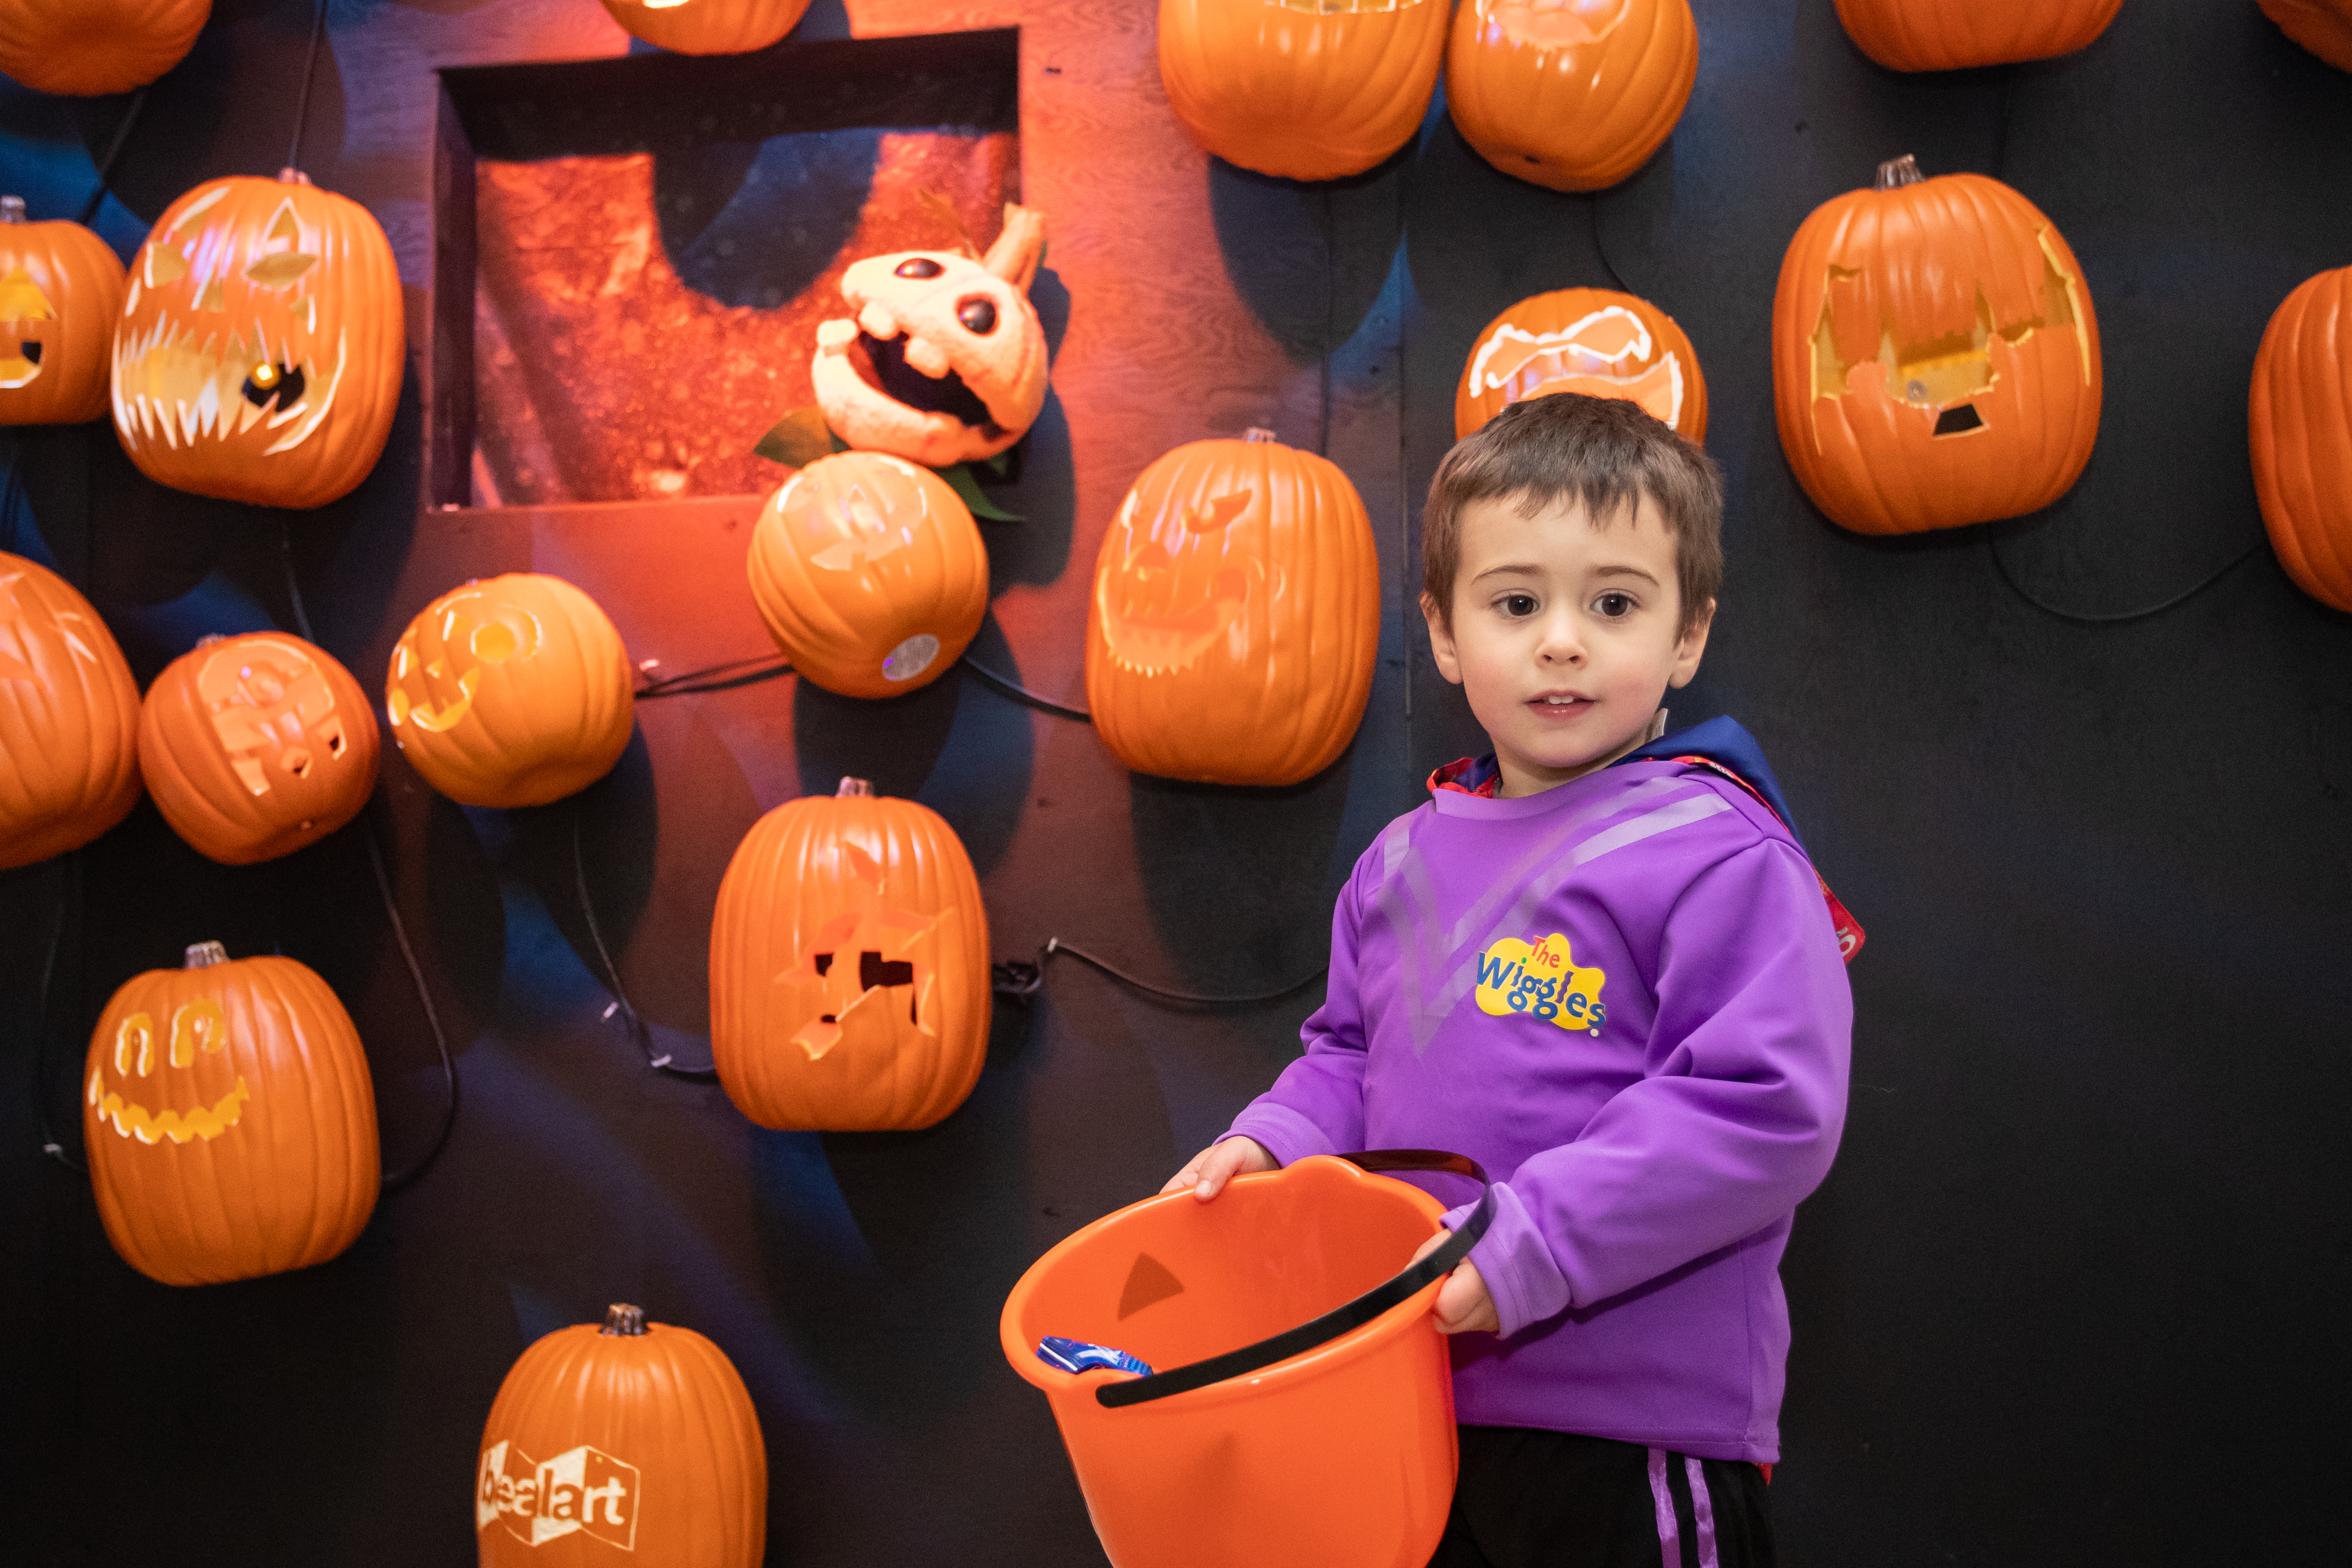 Child with a Wiggles custome holding a trick-or-treat basket and smiling at the camera. Halloween decorations, including pupkins, are seen in the backgournd. 